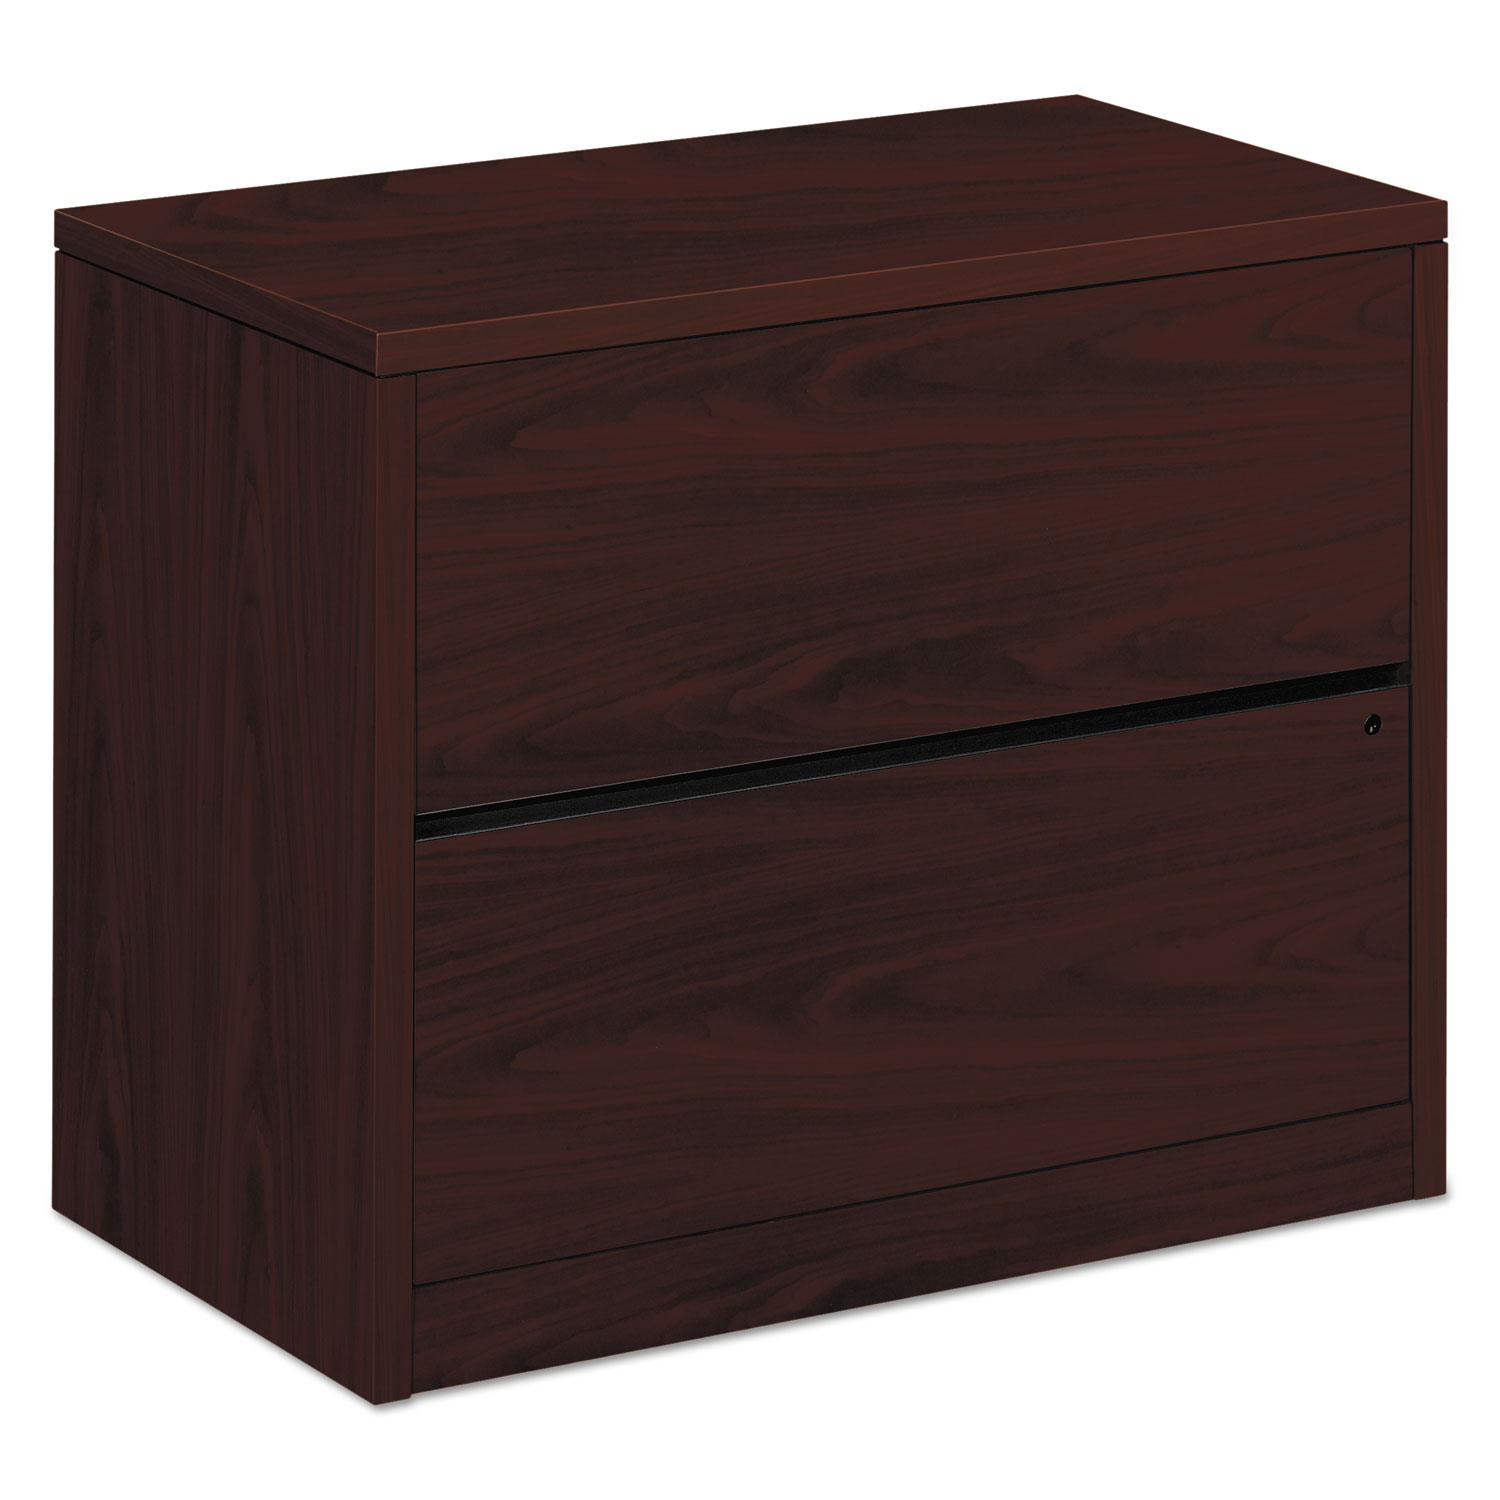 HON  10500 Series Two-Drawer Lateral File, 36w x 20d x 29-1/2h, Mahogany